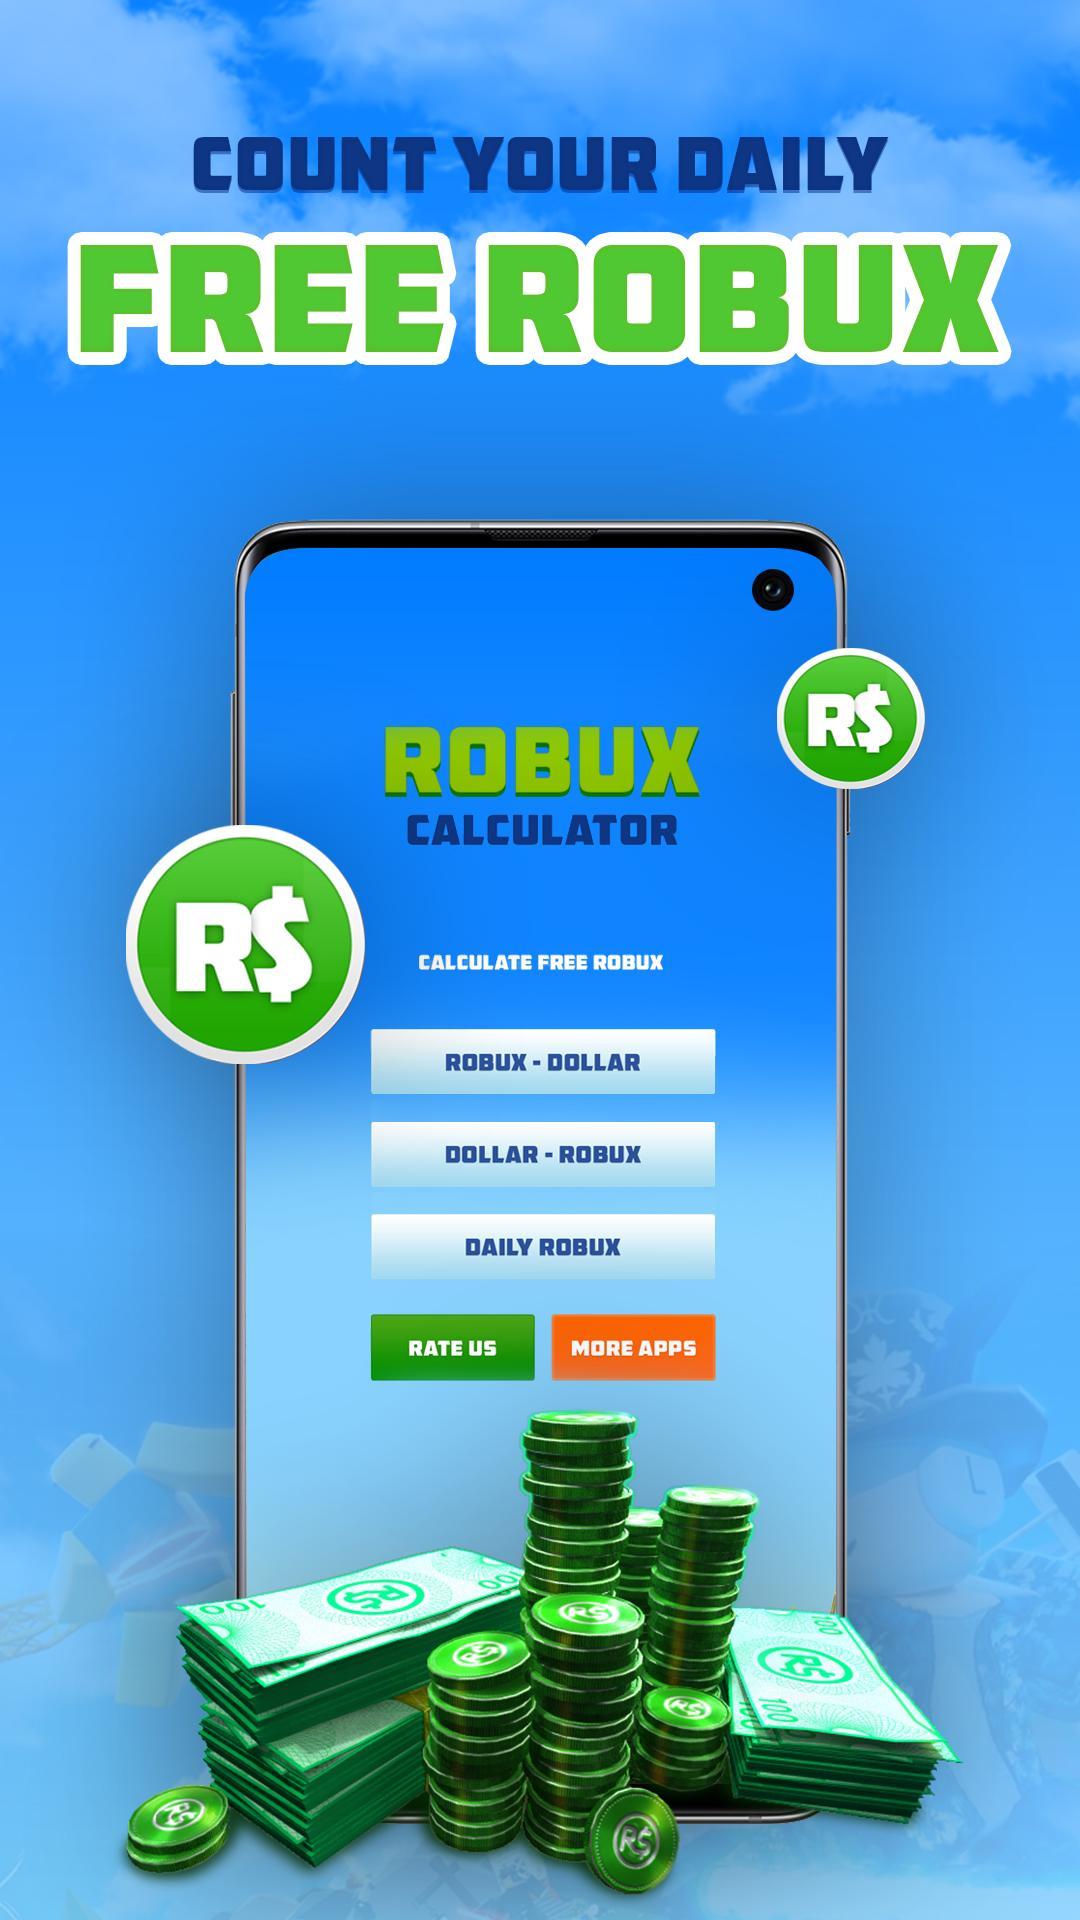 Free Robux Calculator For Android Apk Download - robux to dollars calculator